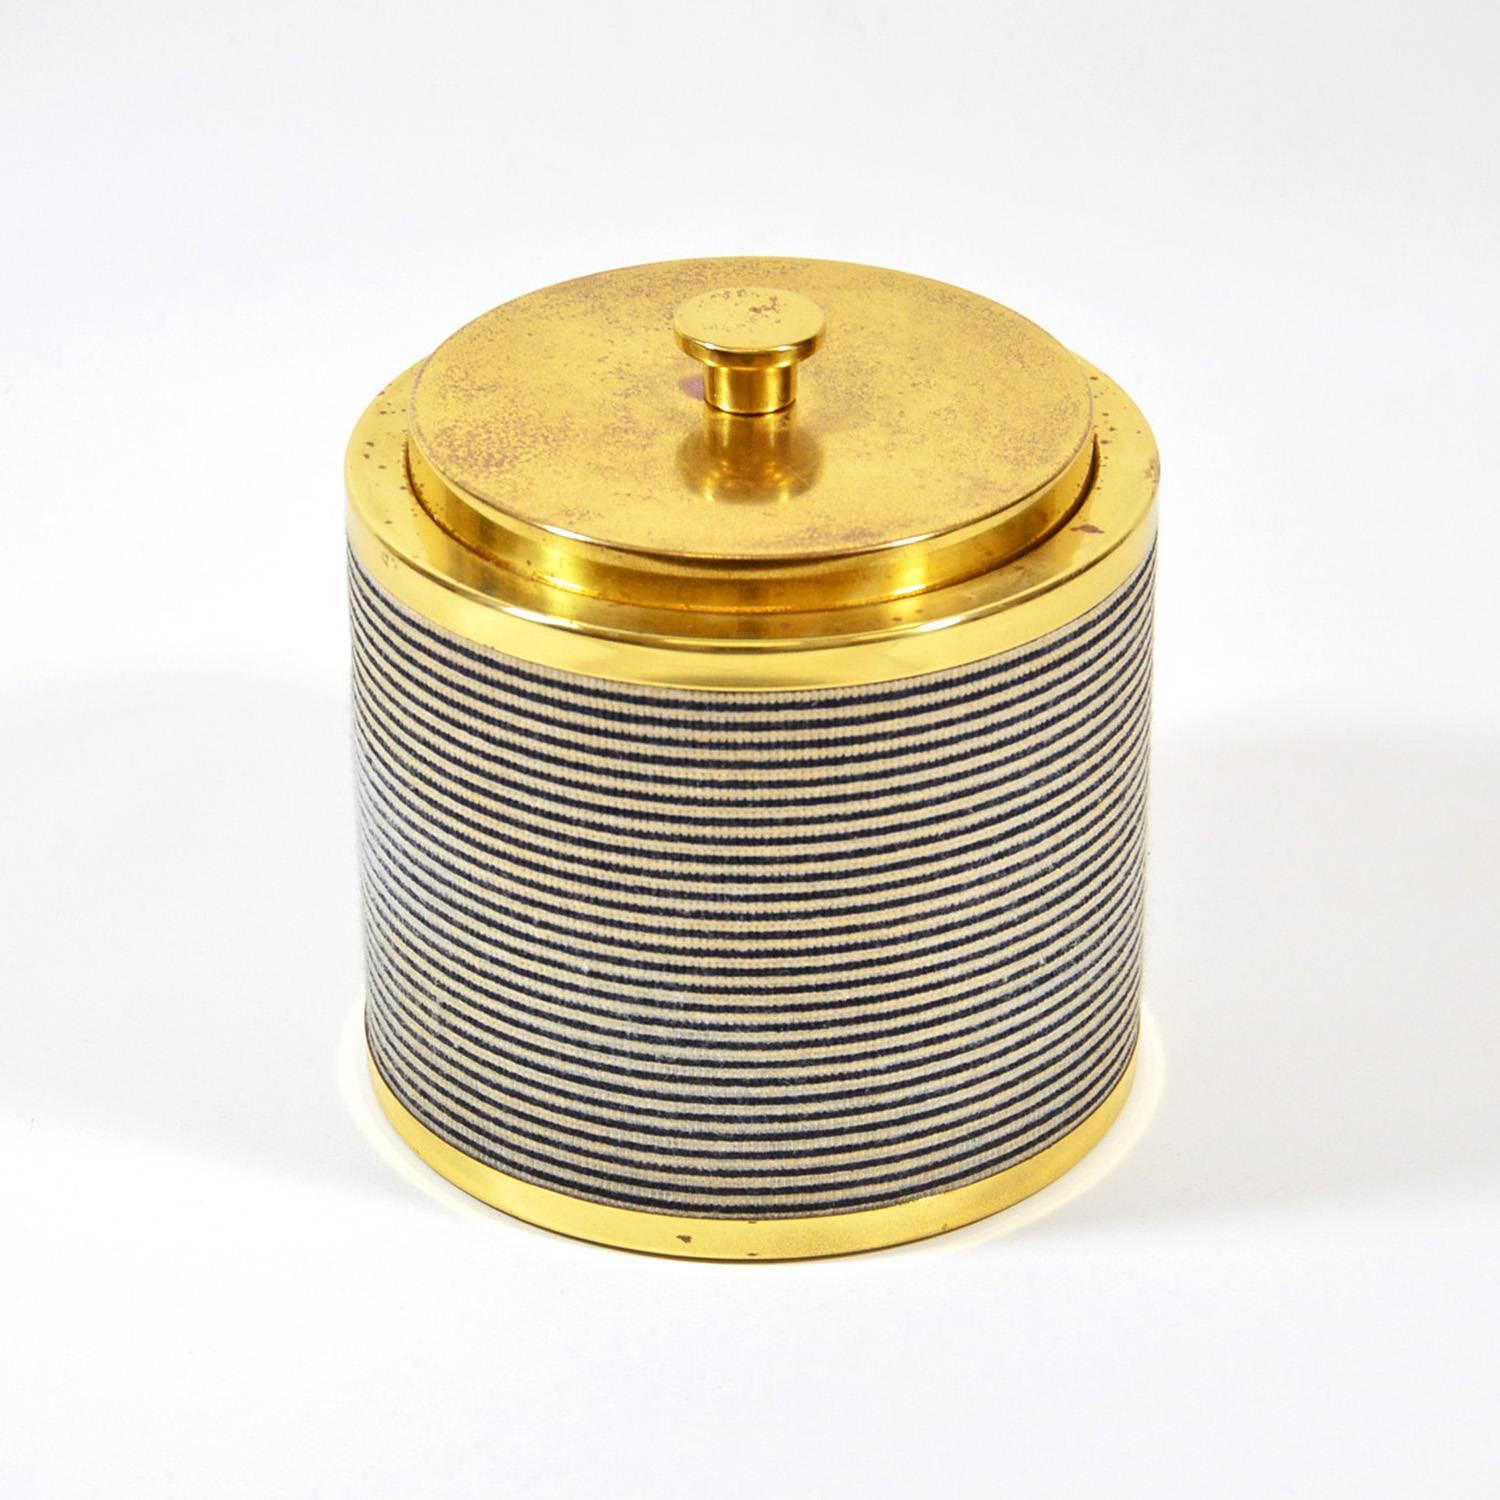 Ice bucket made of brass with stripe fabric cover, off white and navy blue, manufactured in Italy by Rinnovel, circa 1970. It can be attributed to Ettore Sottsass, who designed several items for Rinnovel.